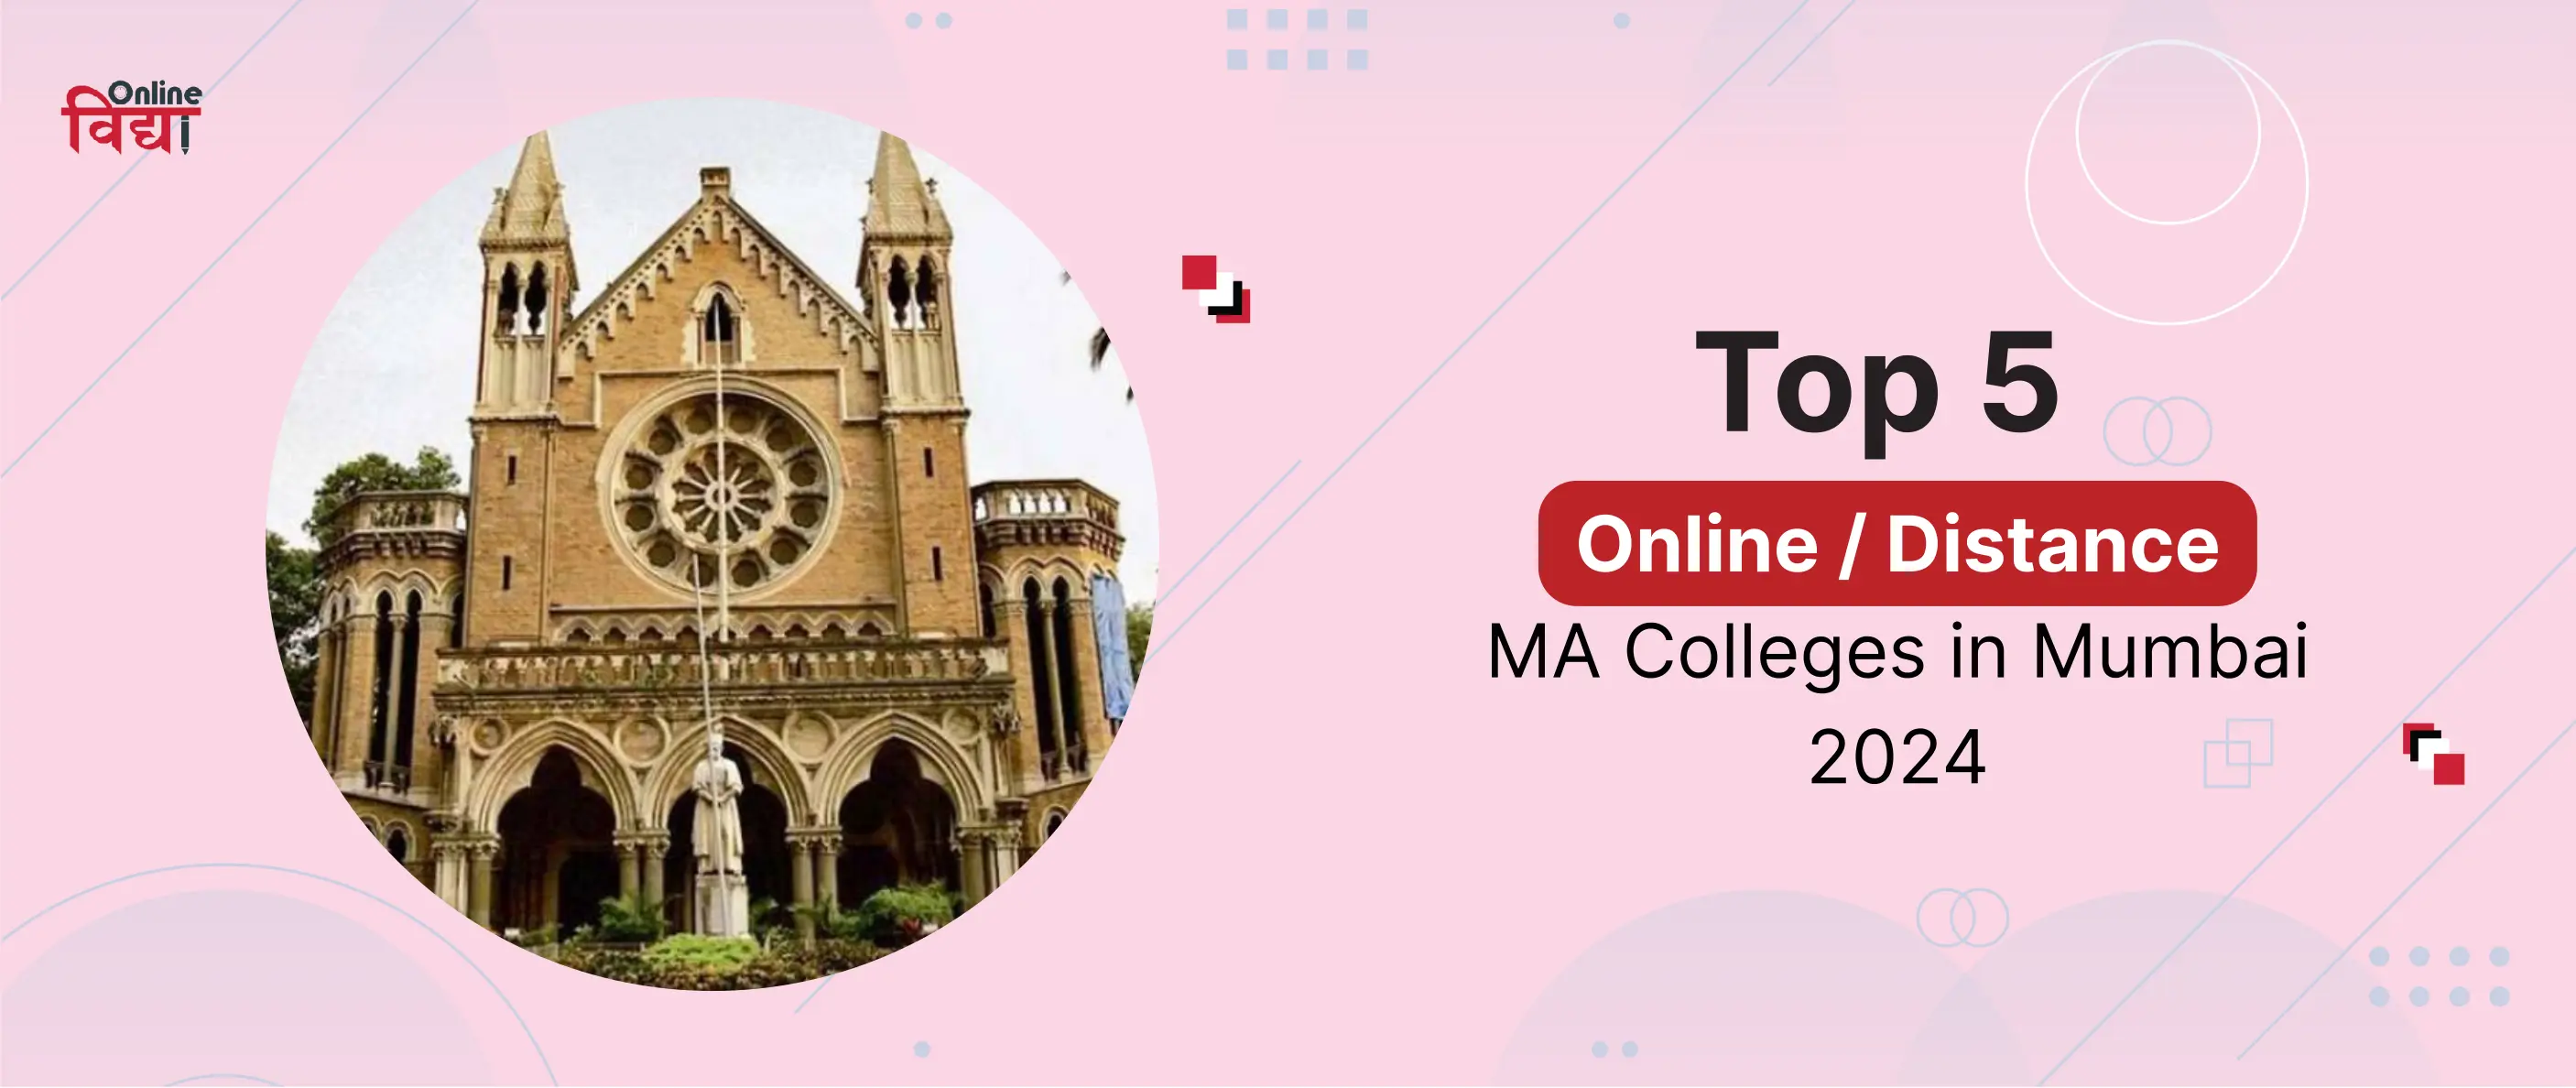 Top 5 Online/Distance MA Colleges in Mumbai 2024